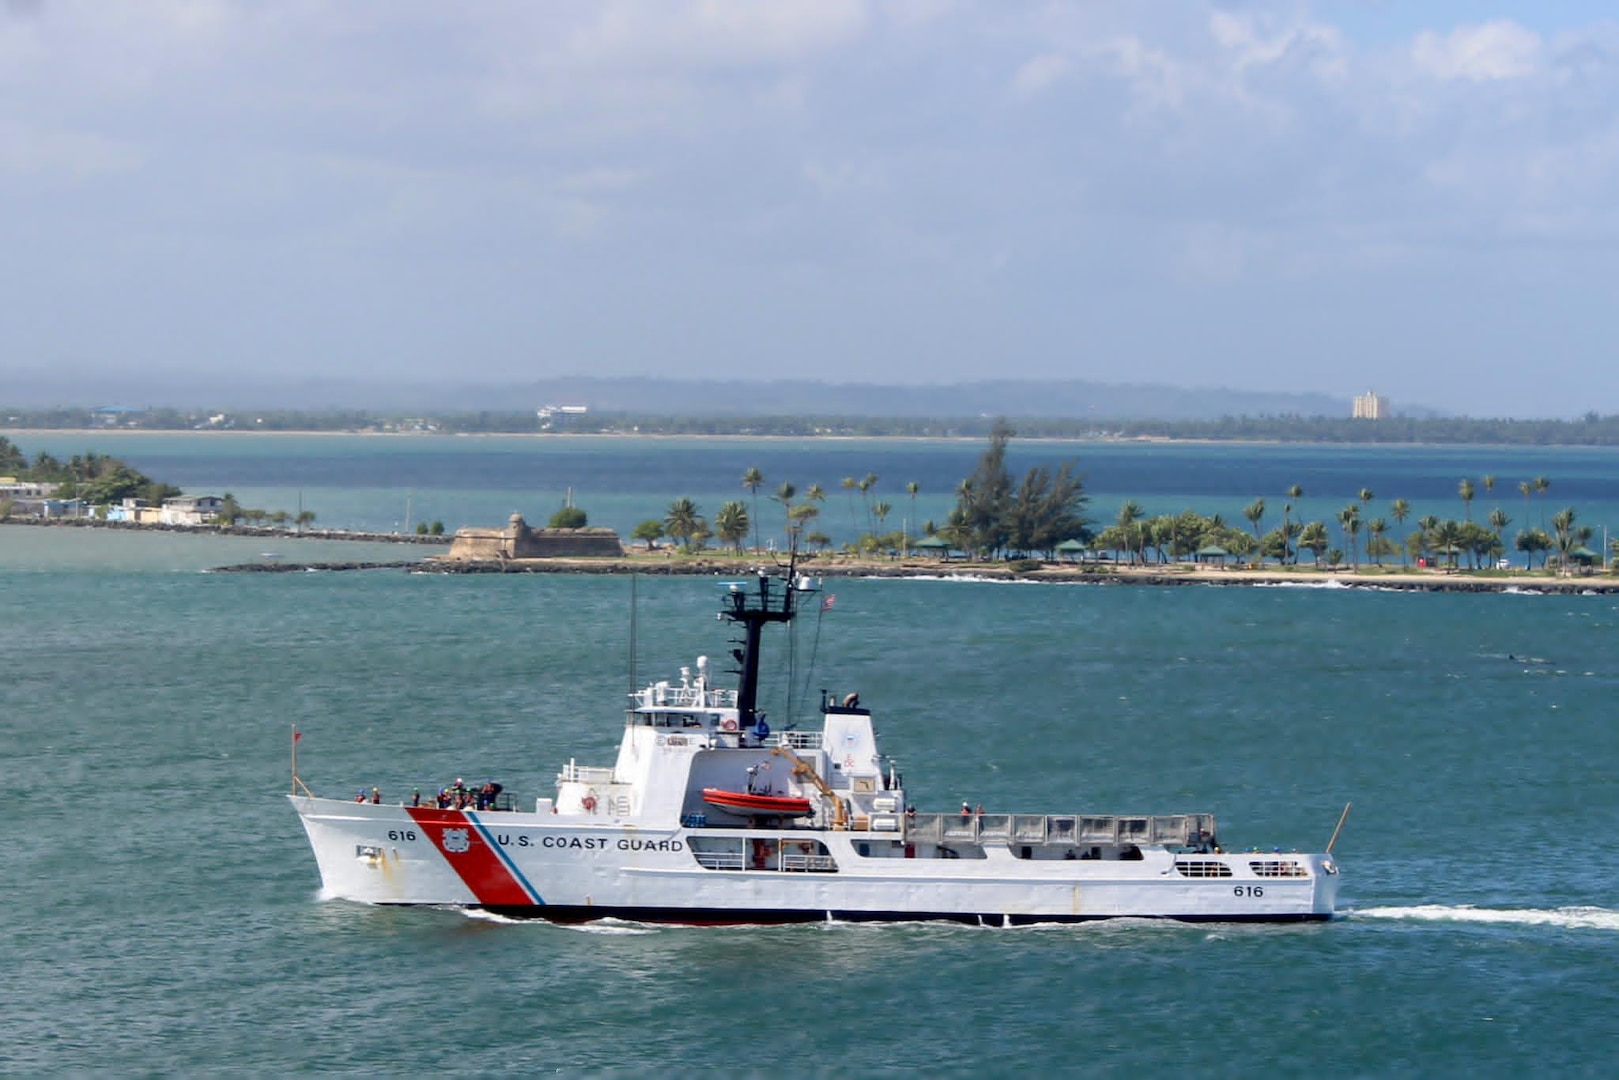 U.S. Coast Guard Cutter Diligence (WMEC 616) enters port in San Juan, Puerto Rico, Nov. 3, 2023. Diligence conducted a Caribbean Sea patrol in support of Joint Interagency Task Force South.